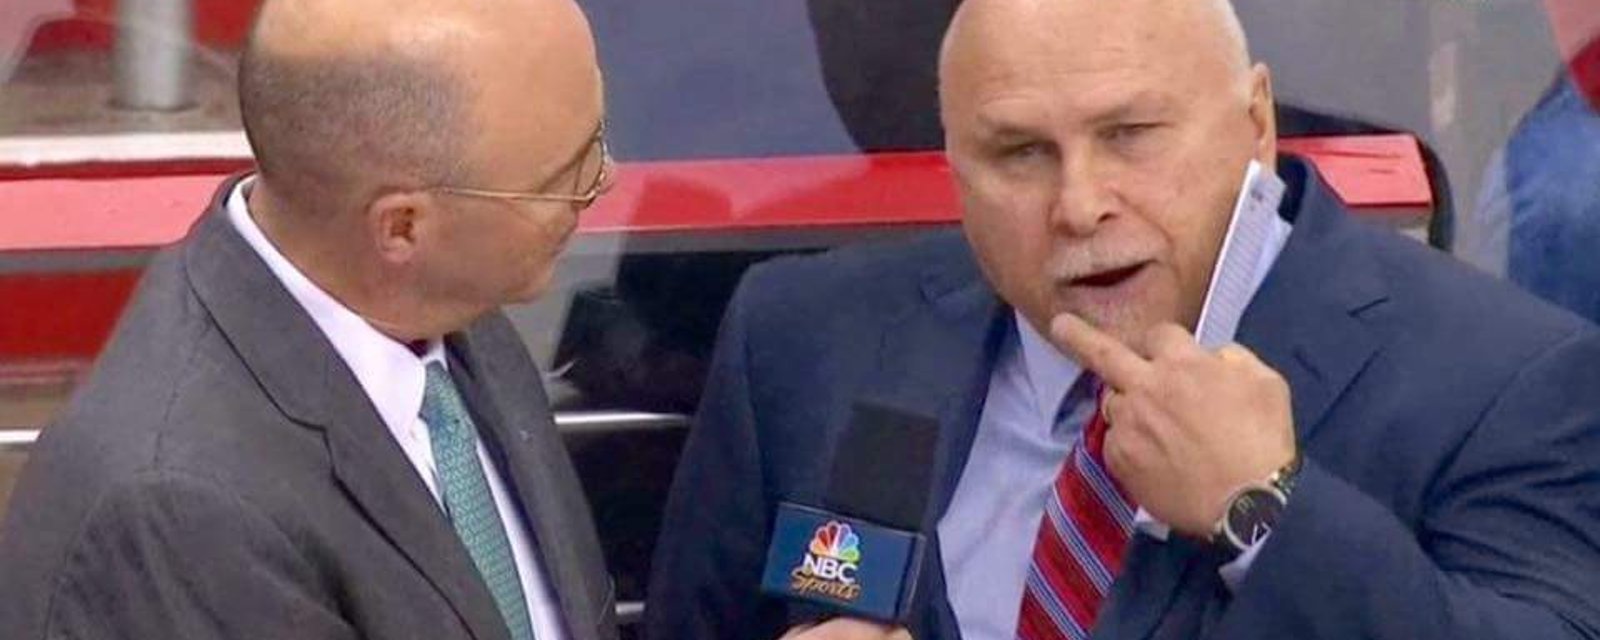 Barry Trotz: Toughest Coach In the NHL?